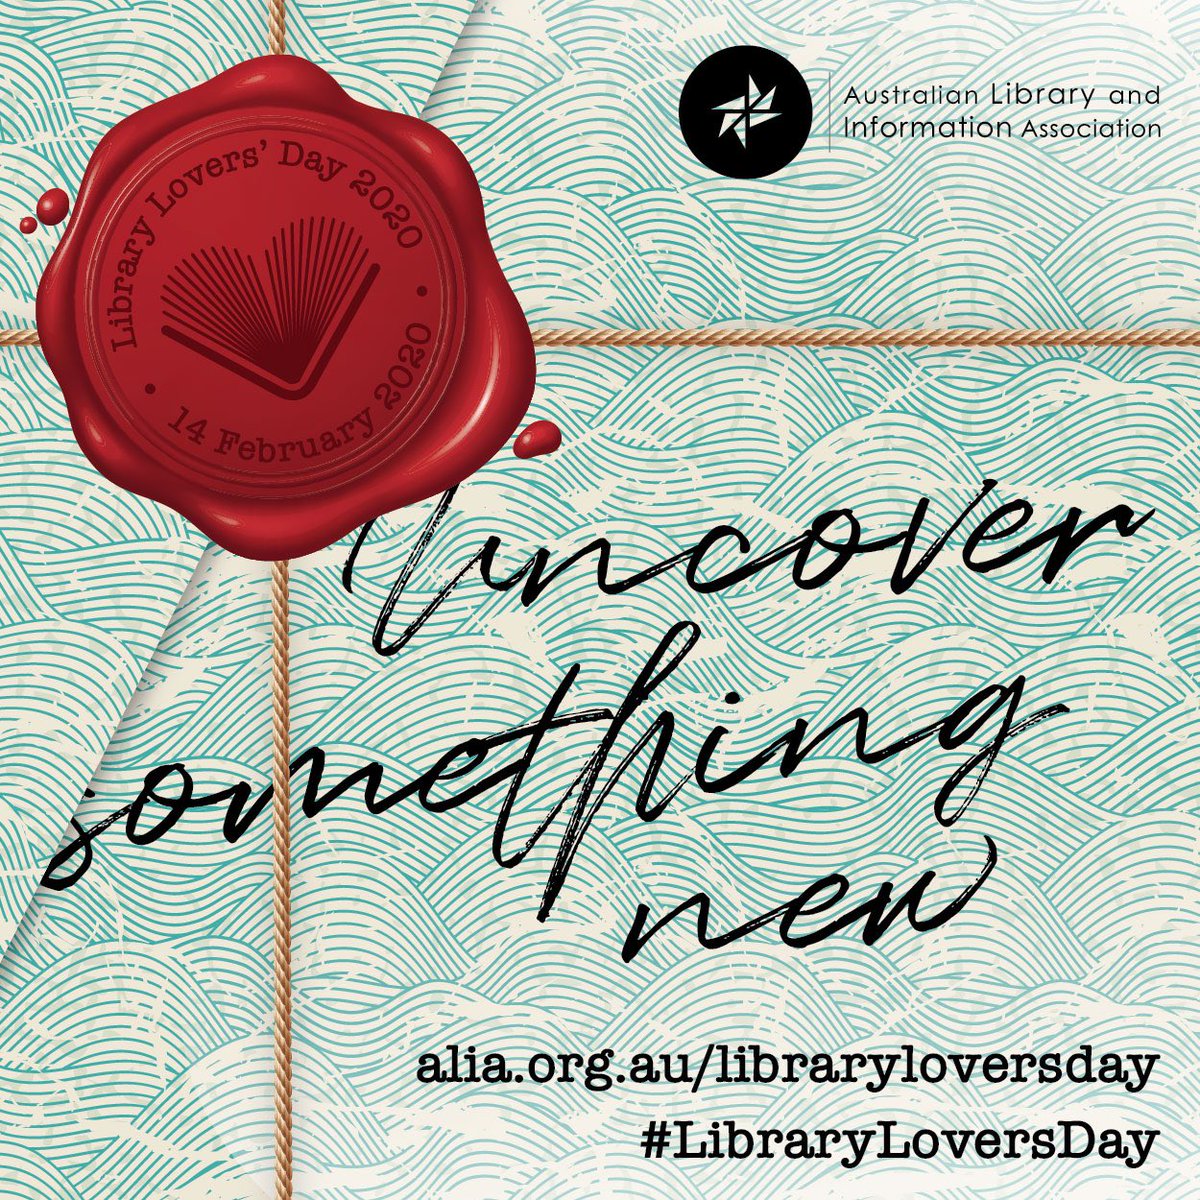 Who cares about Valentine’s Day? More importantly, it’s #LibraryLoversDay. You can celebrate by visiting your local public, state, university or school library and giving your librarian a hug (kidding, they are introverts), maybe a high-five or some cake instead